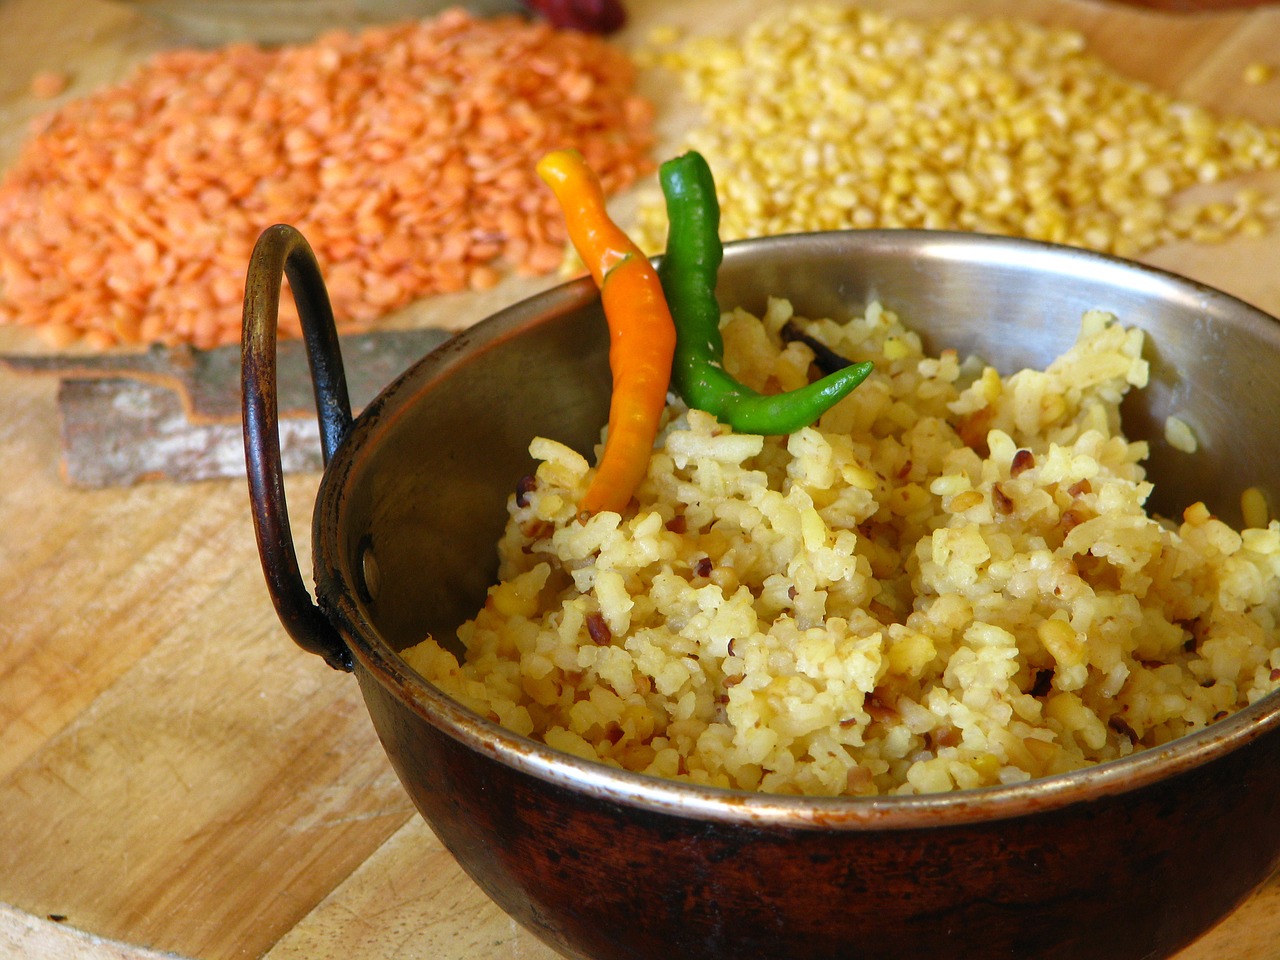 red lentils and grains with hot peppers